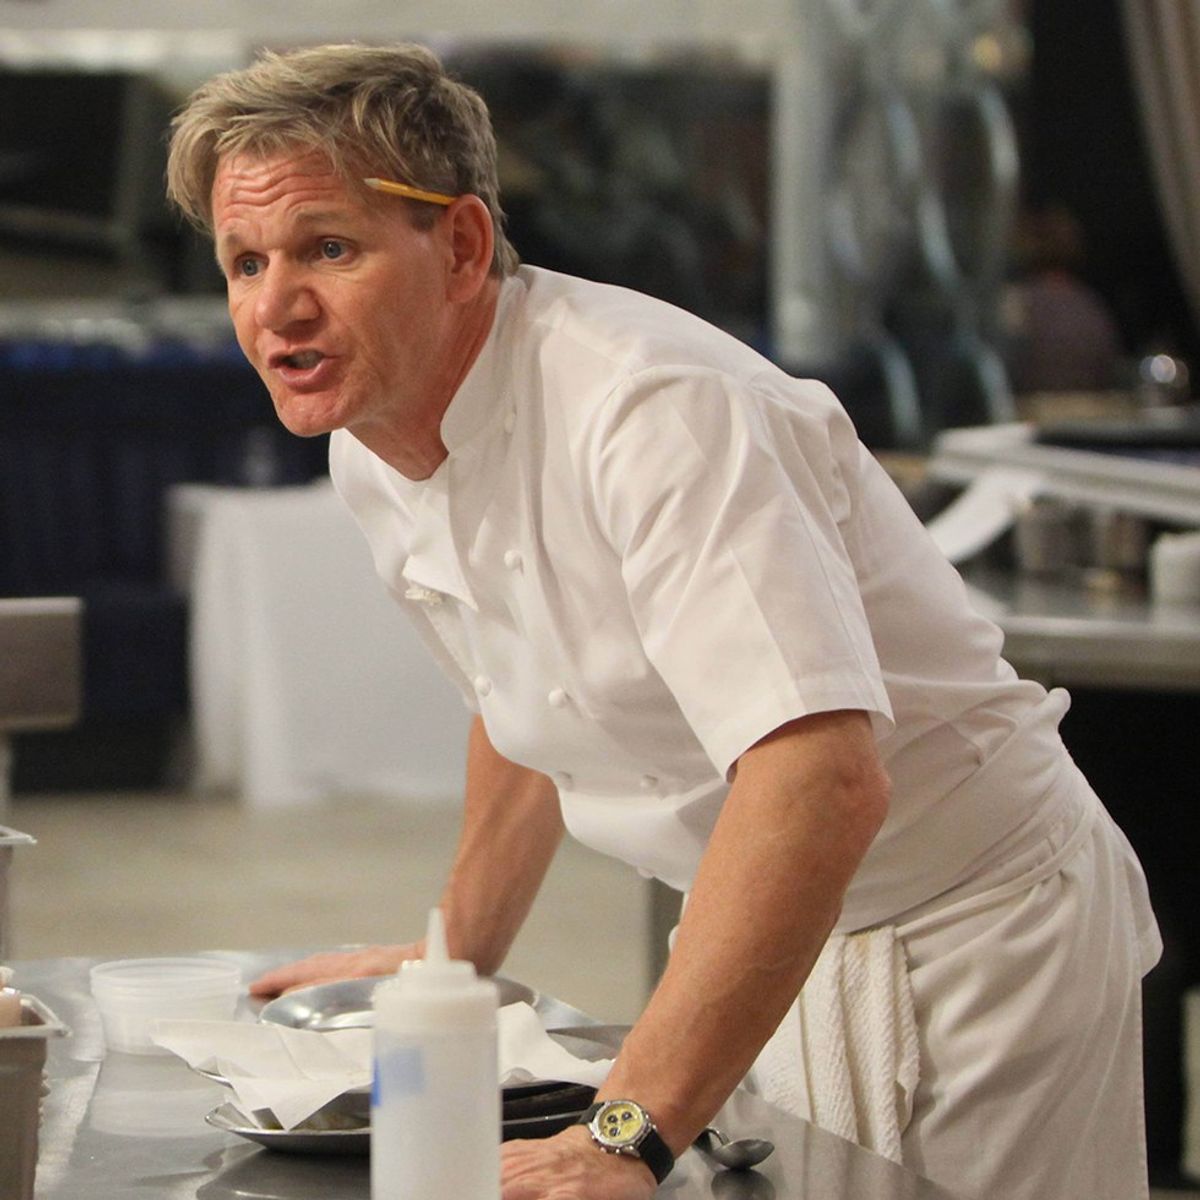 10 Stages Of Watching The Cooking Channel, As Told By Gordon Ramsay